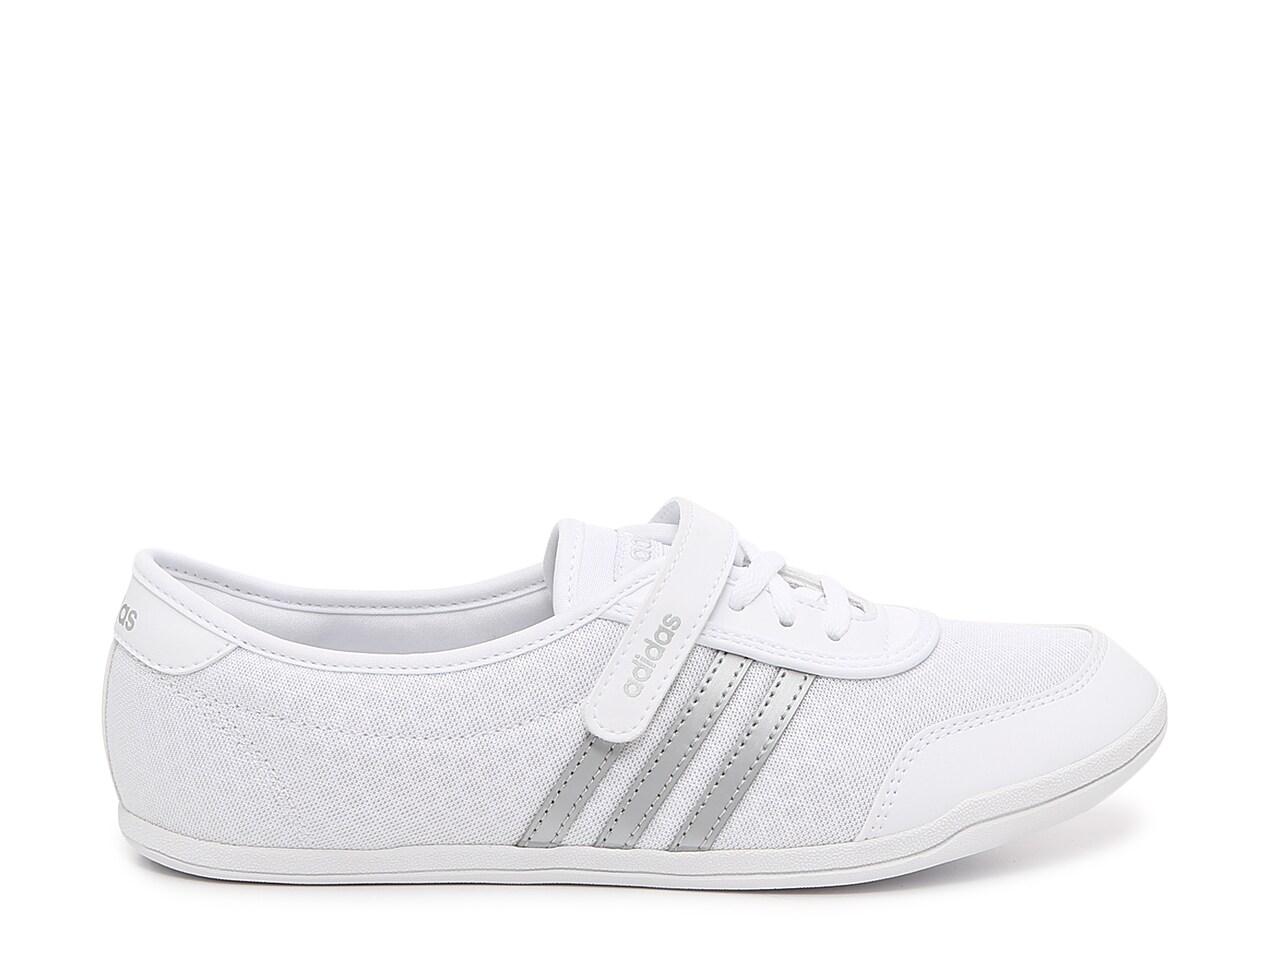 adidas Diona Slip-on Sneaker in White | Lyst